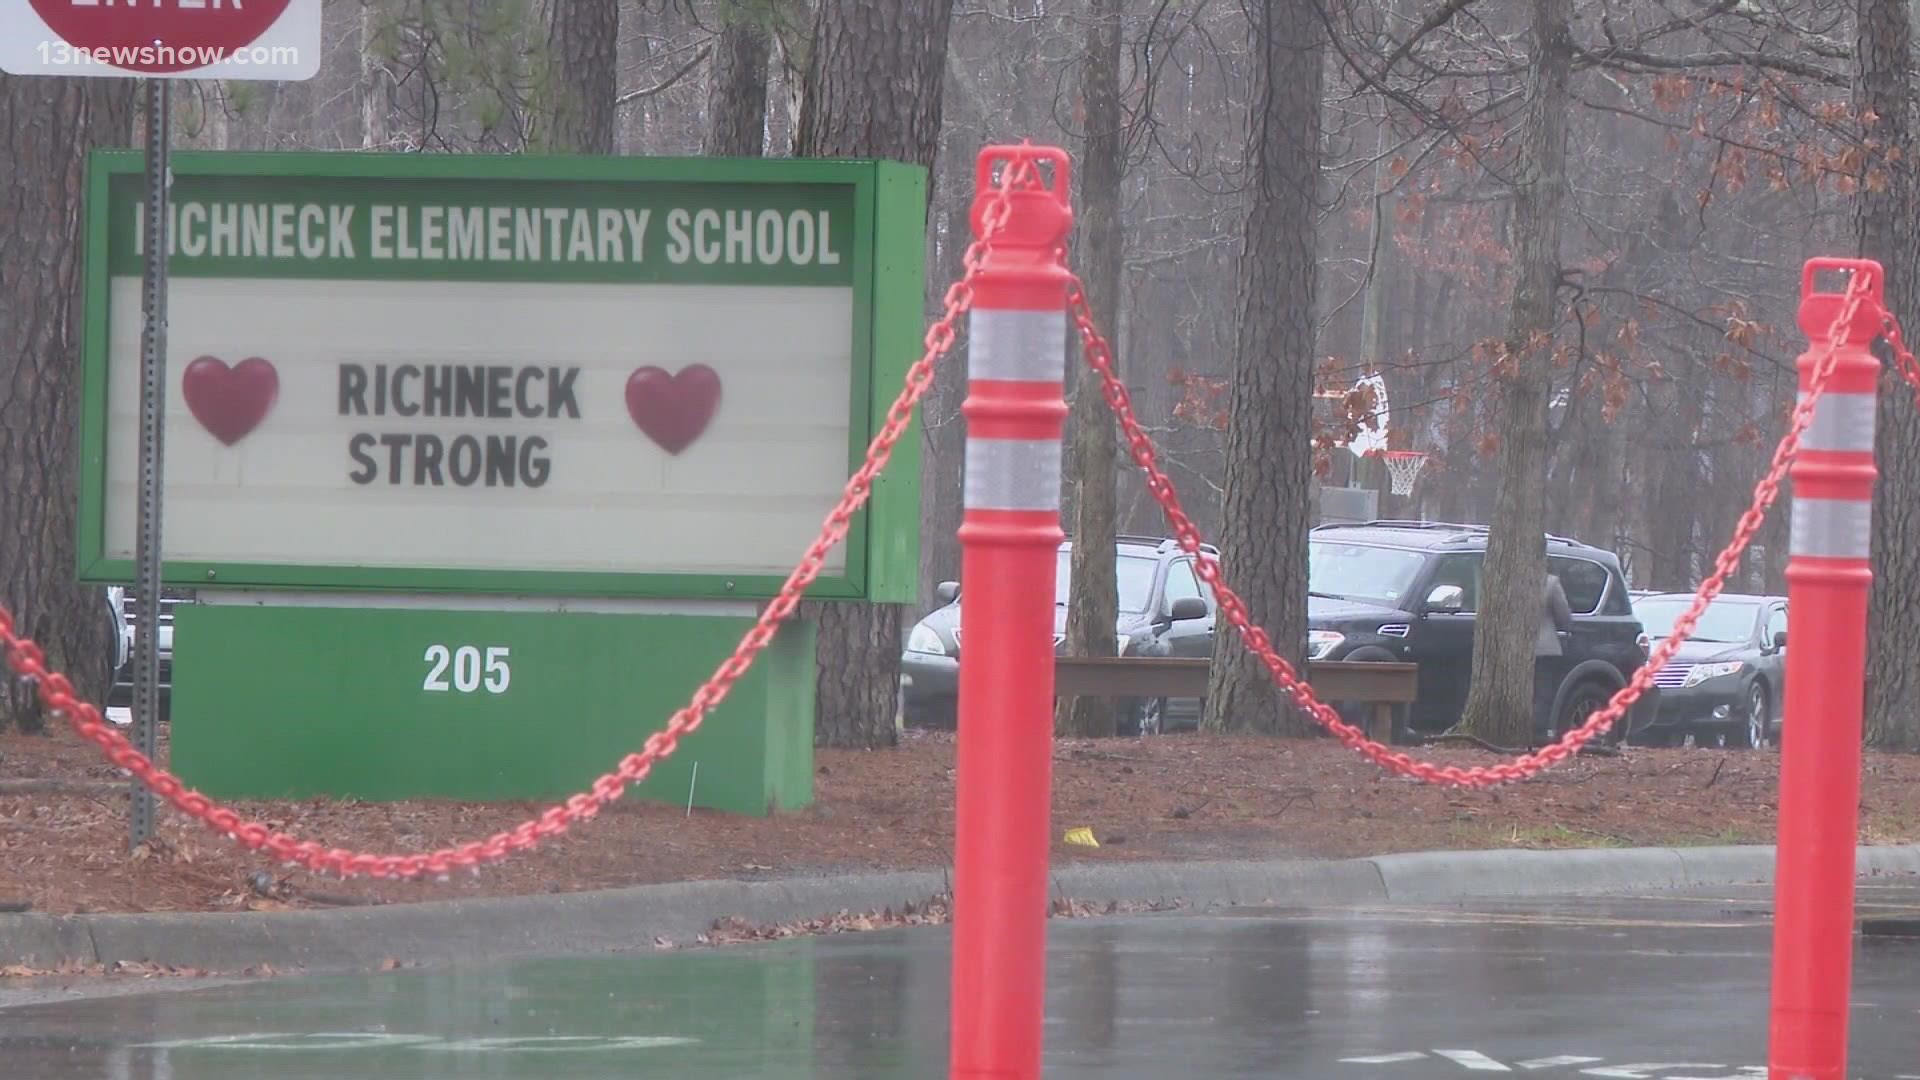 Jan. 30 is the first day back in the classroom for students since that tragic day.